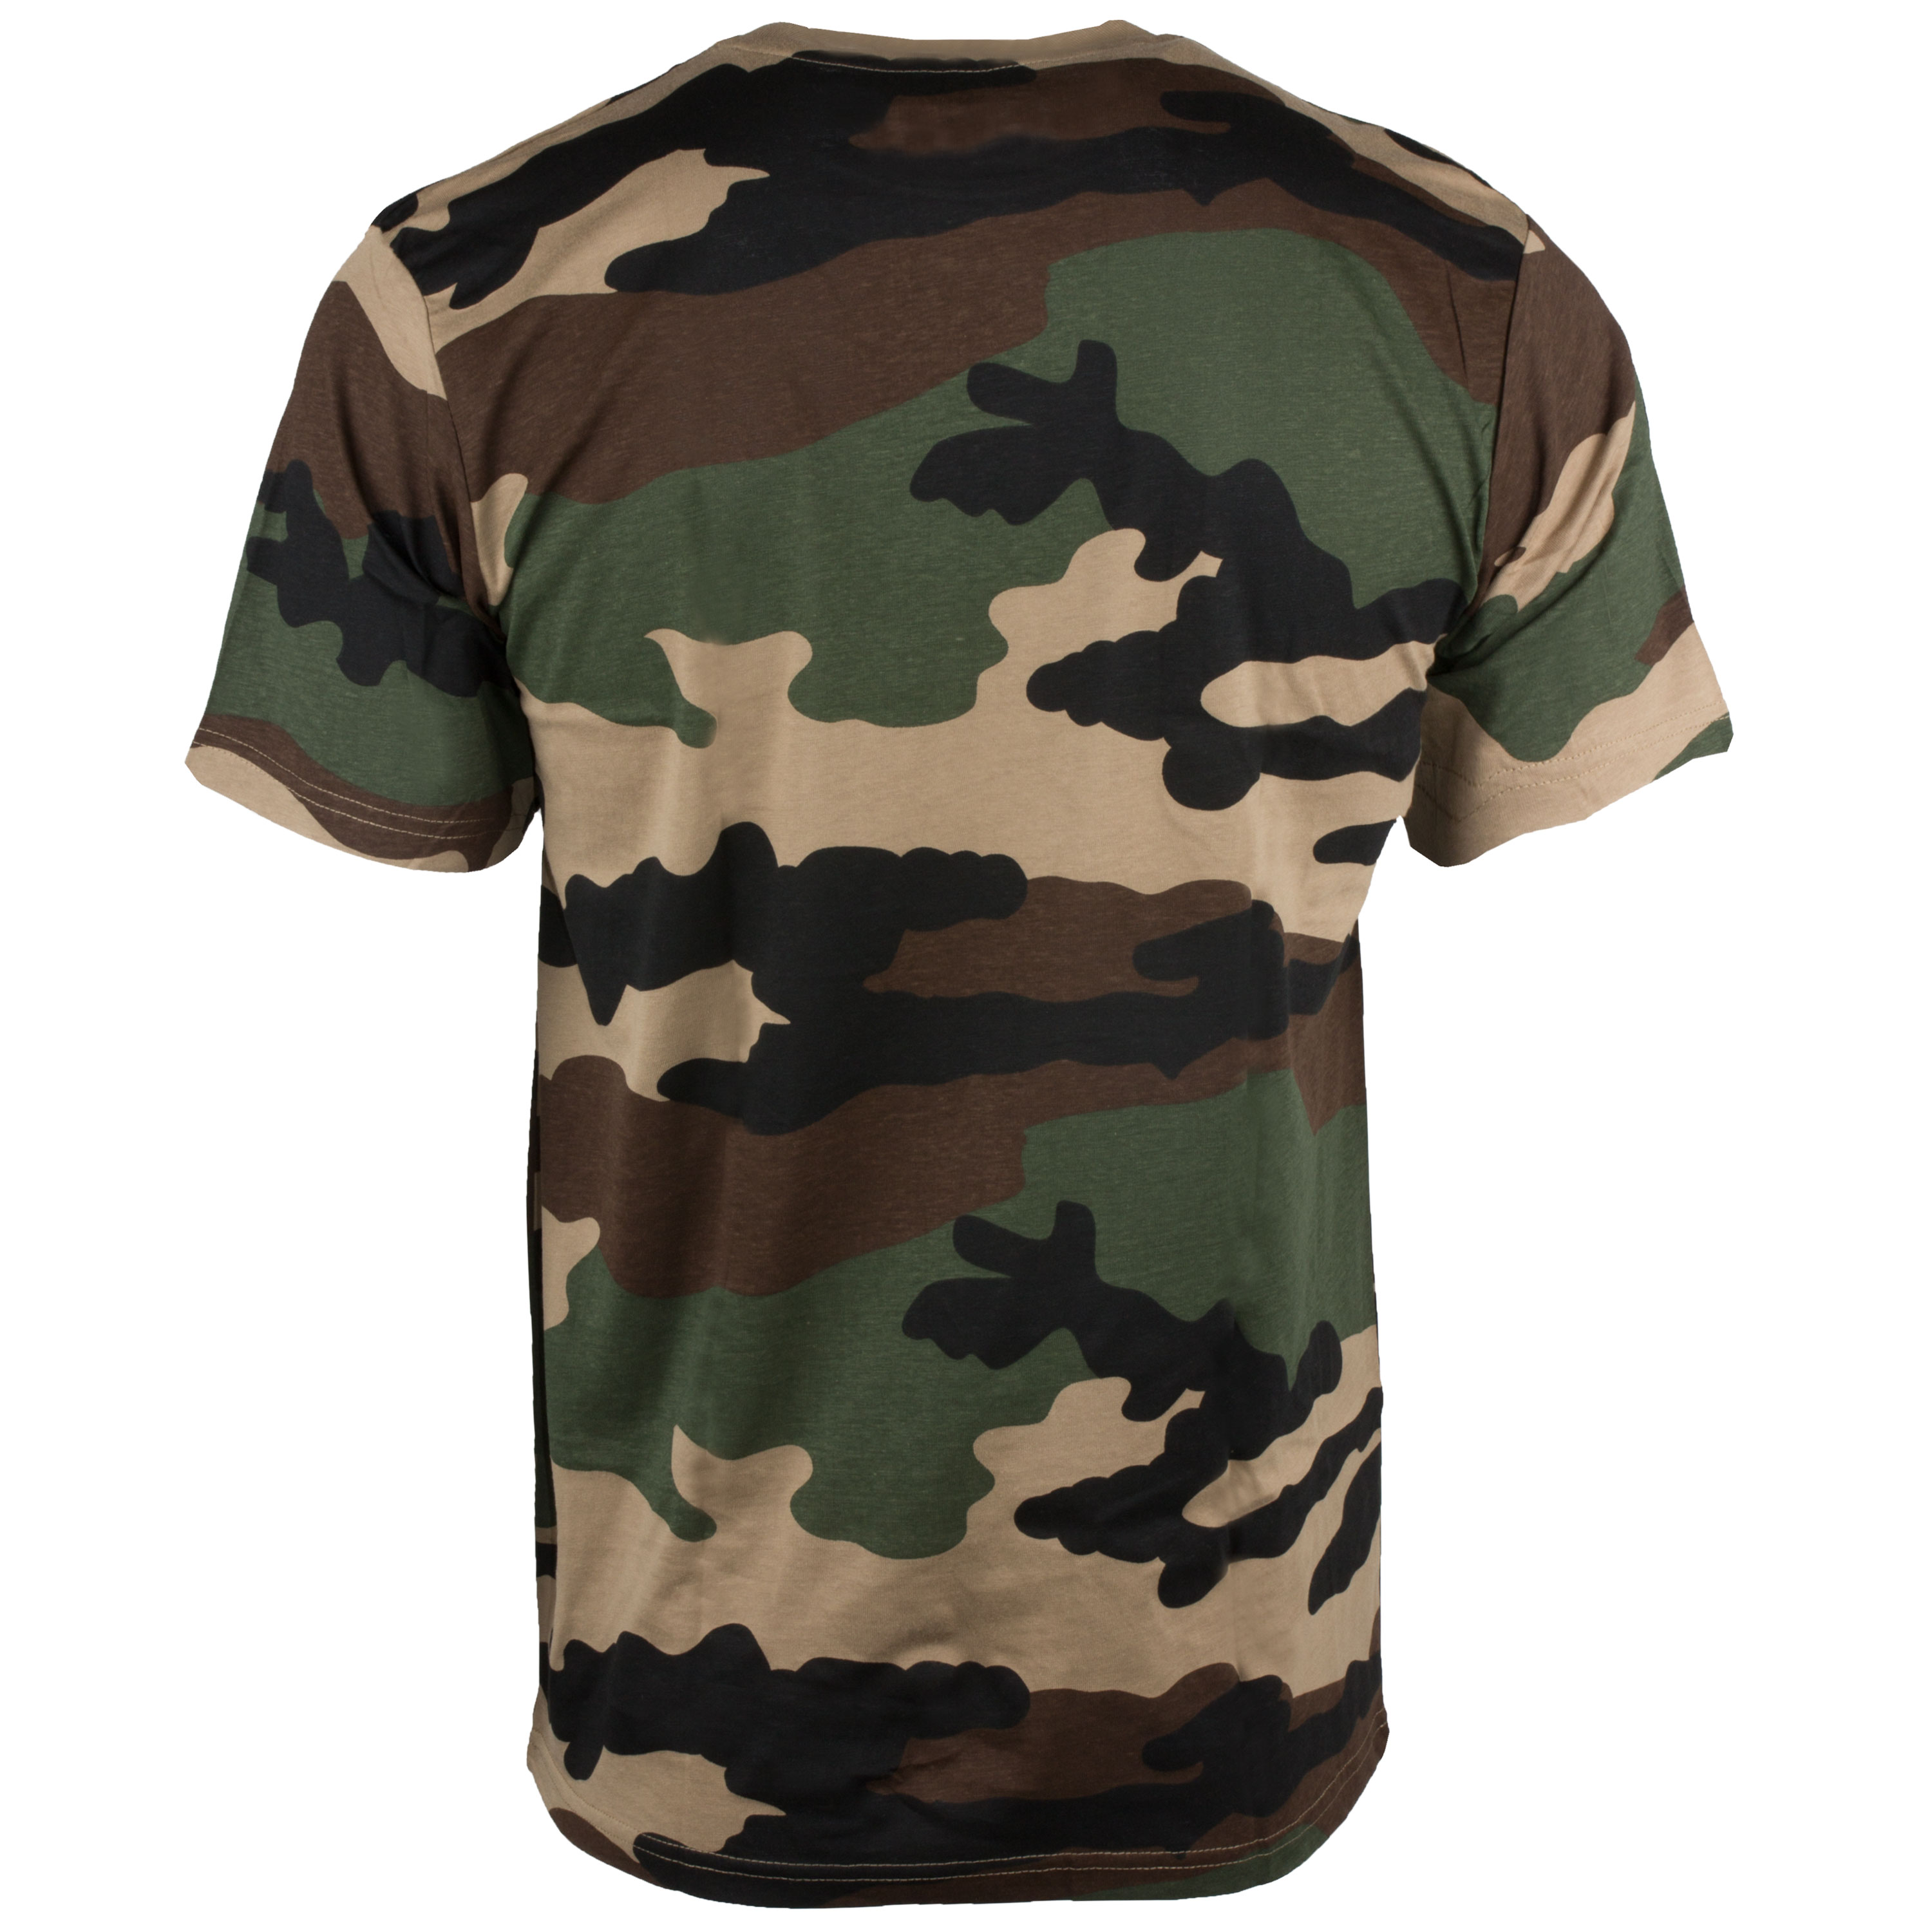 Camouflage Shirts - Buy Camouflage Shirts Online Starting at Just ₹292